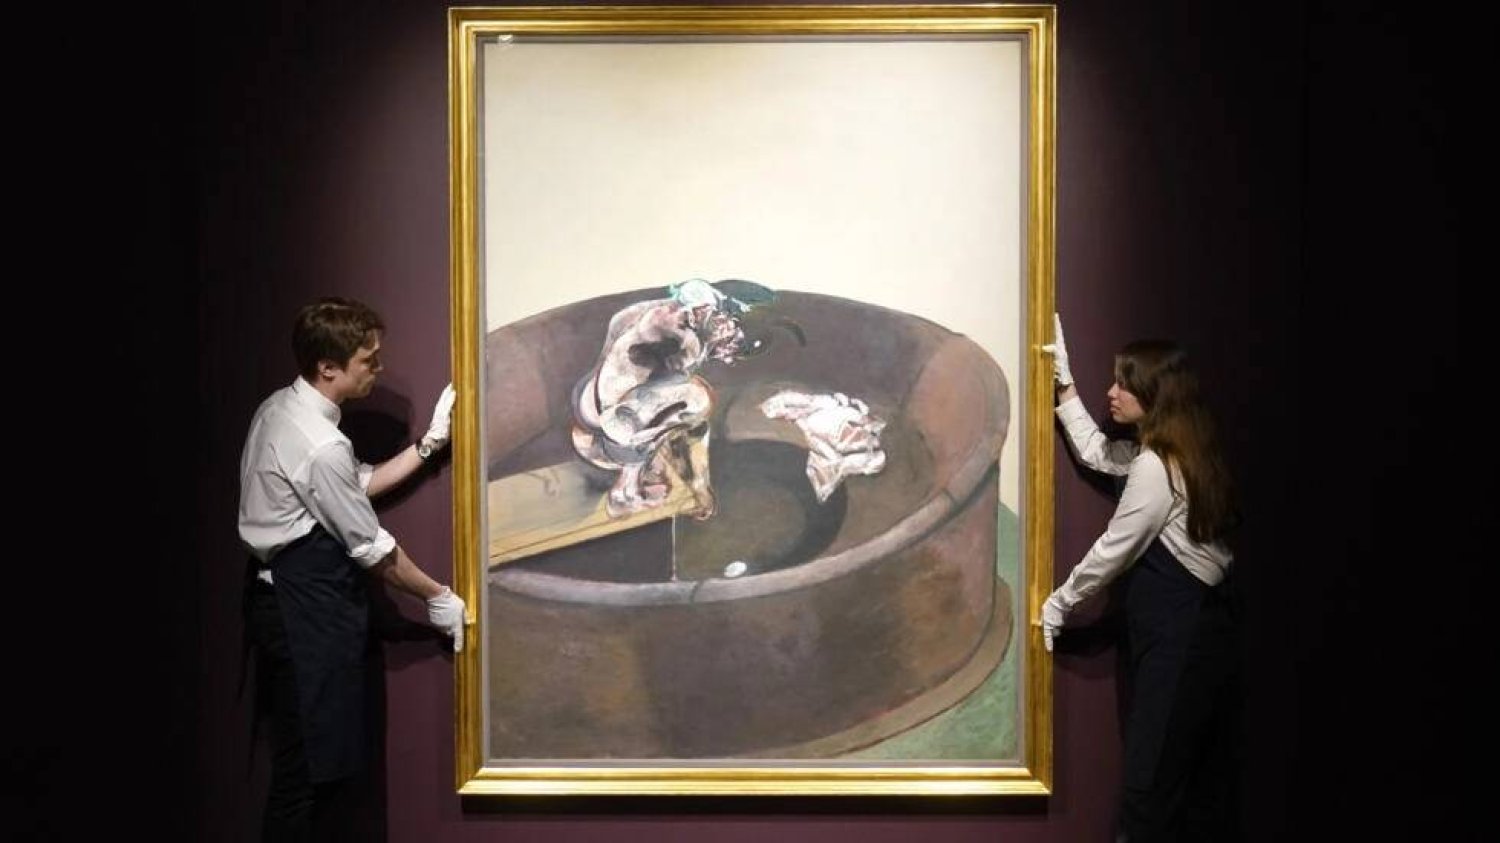 At Sotheby's, the jewel in the sale crown is a Francis Bacon portrait estimated at $30-50 million. TIMOTHY A. CLARY / AFP
